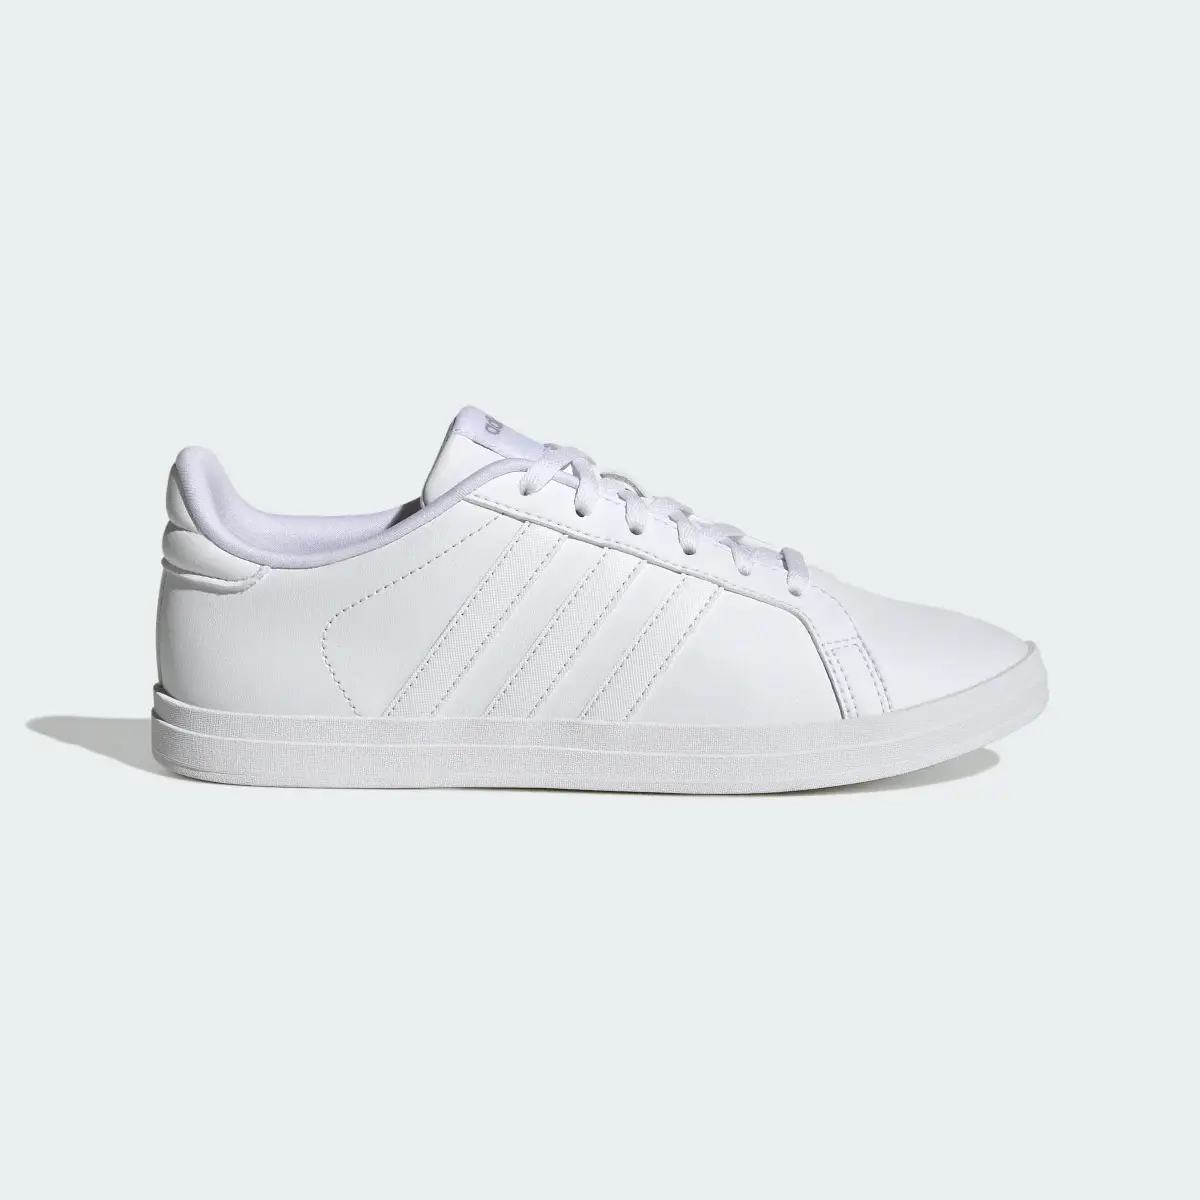 Adidas Courtpoint X Shoes. 2